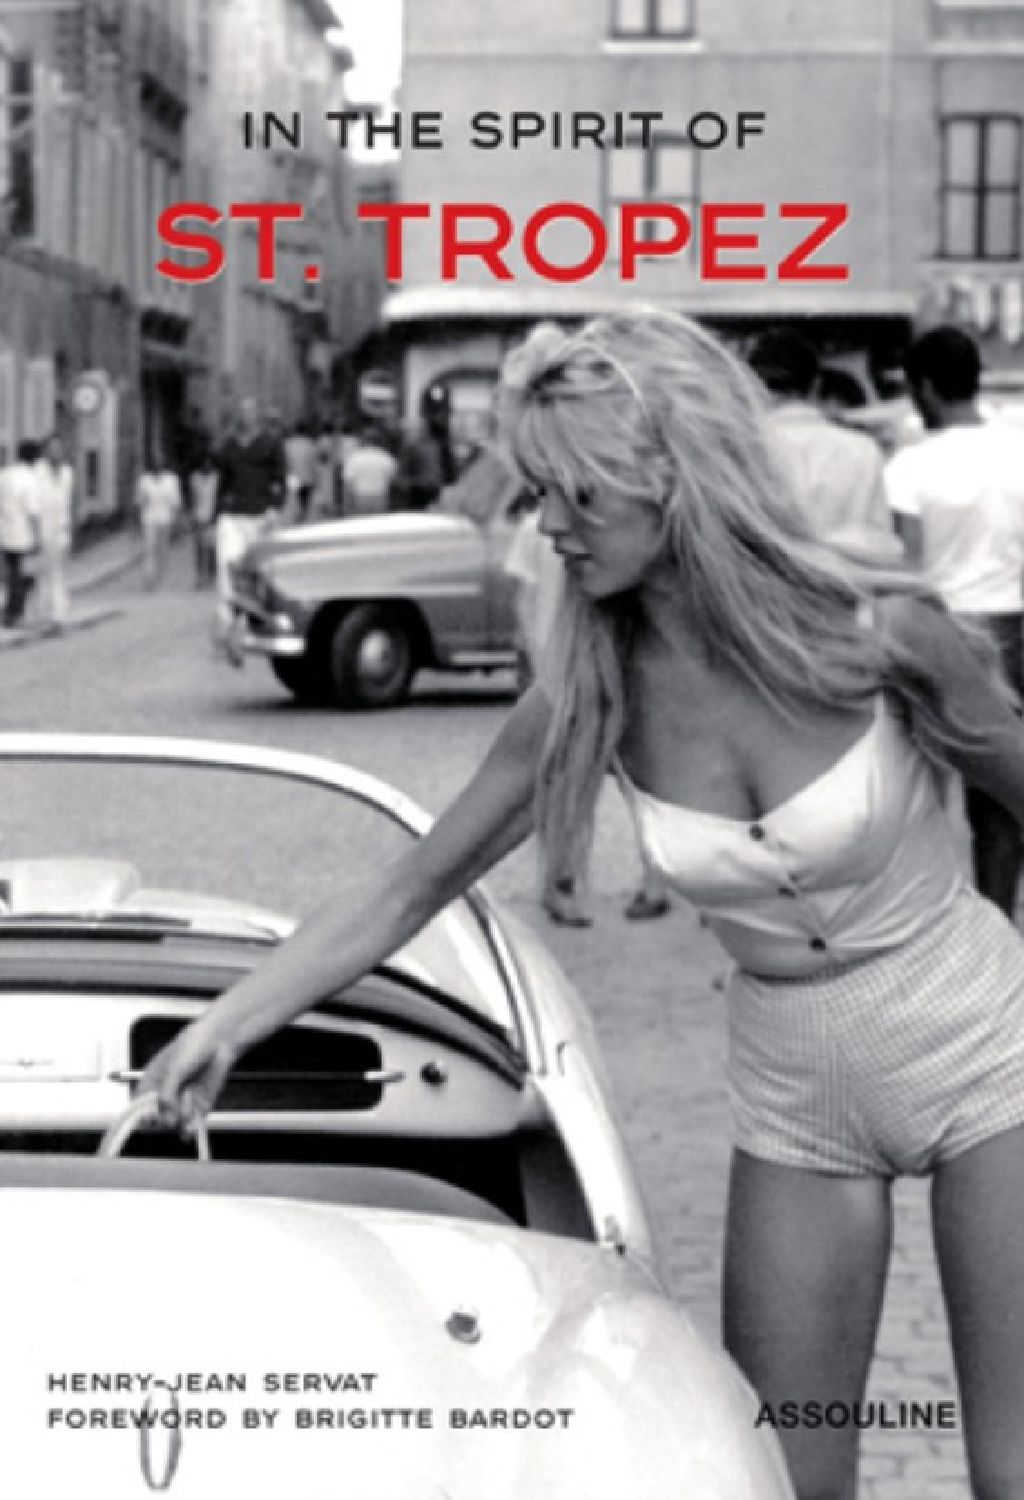 Book cover, IN THE SPIRIT OF ST. TROPEZ by Henry-Jean Servat (Assouline, 2003) with Brigitte Bardot reaching into a convertible on a city street.